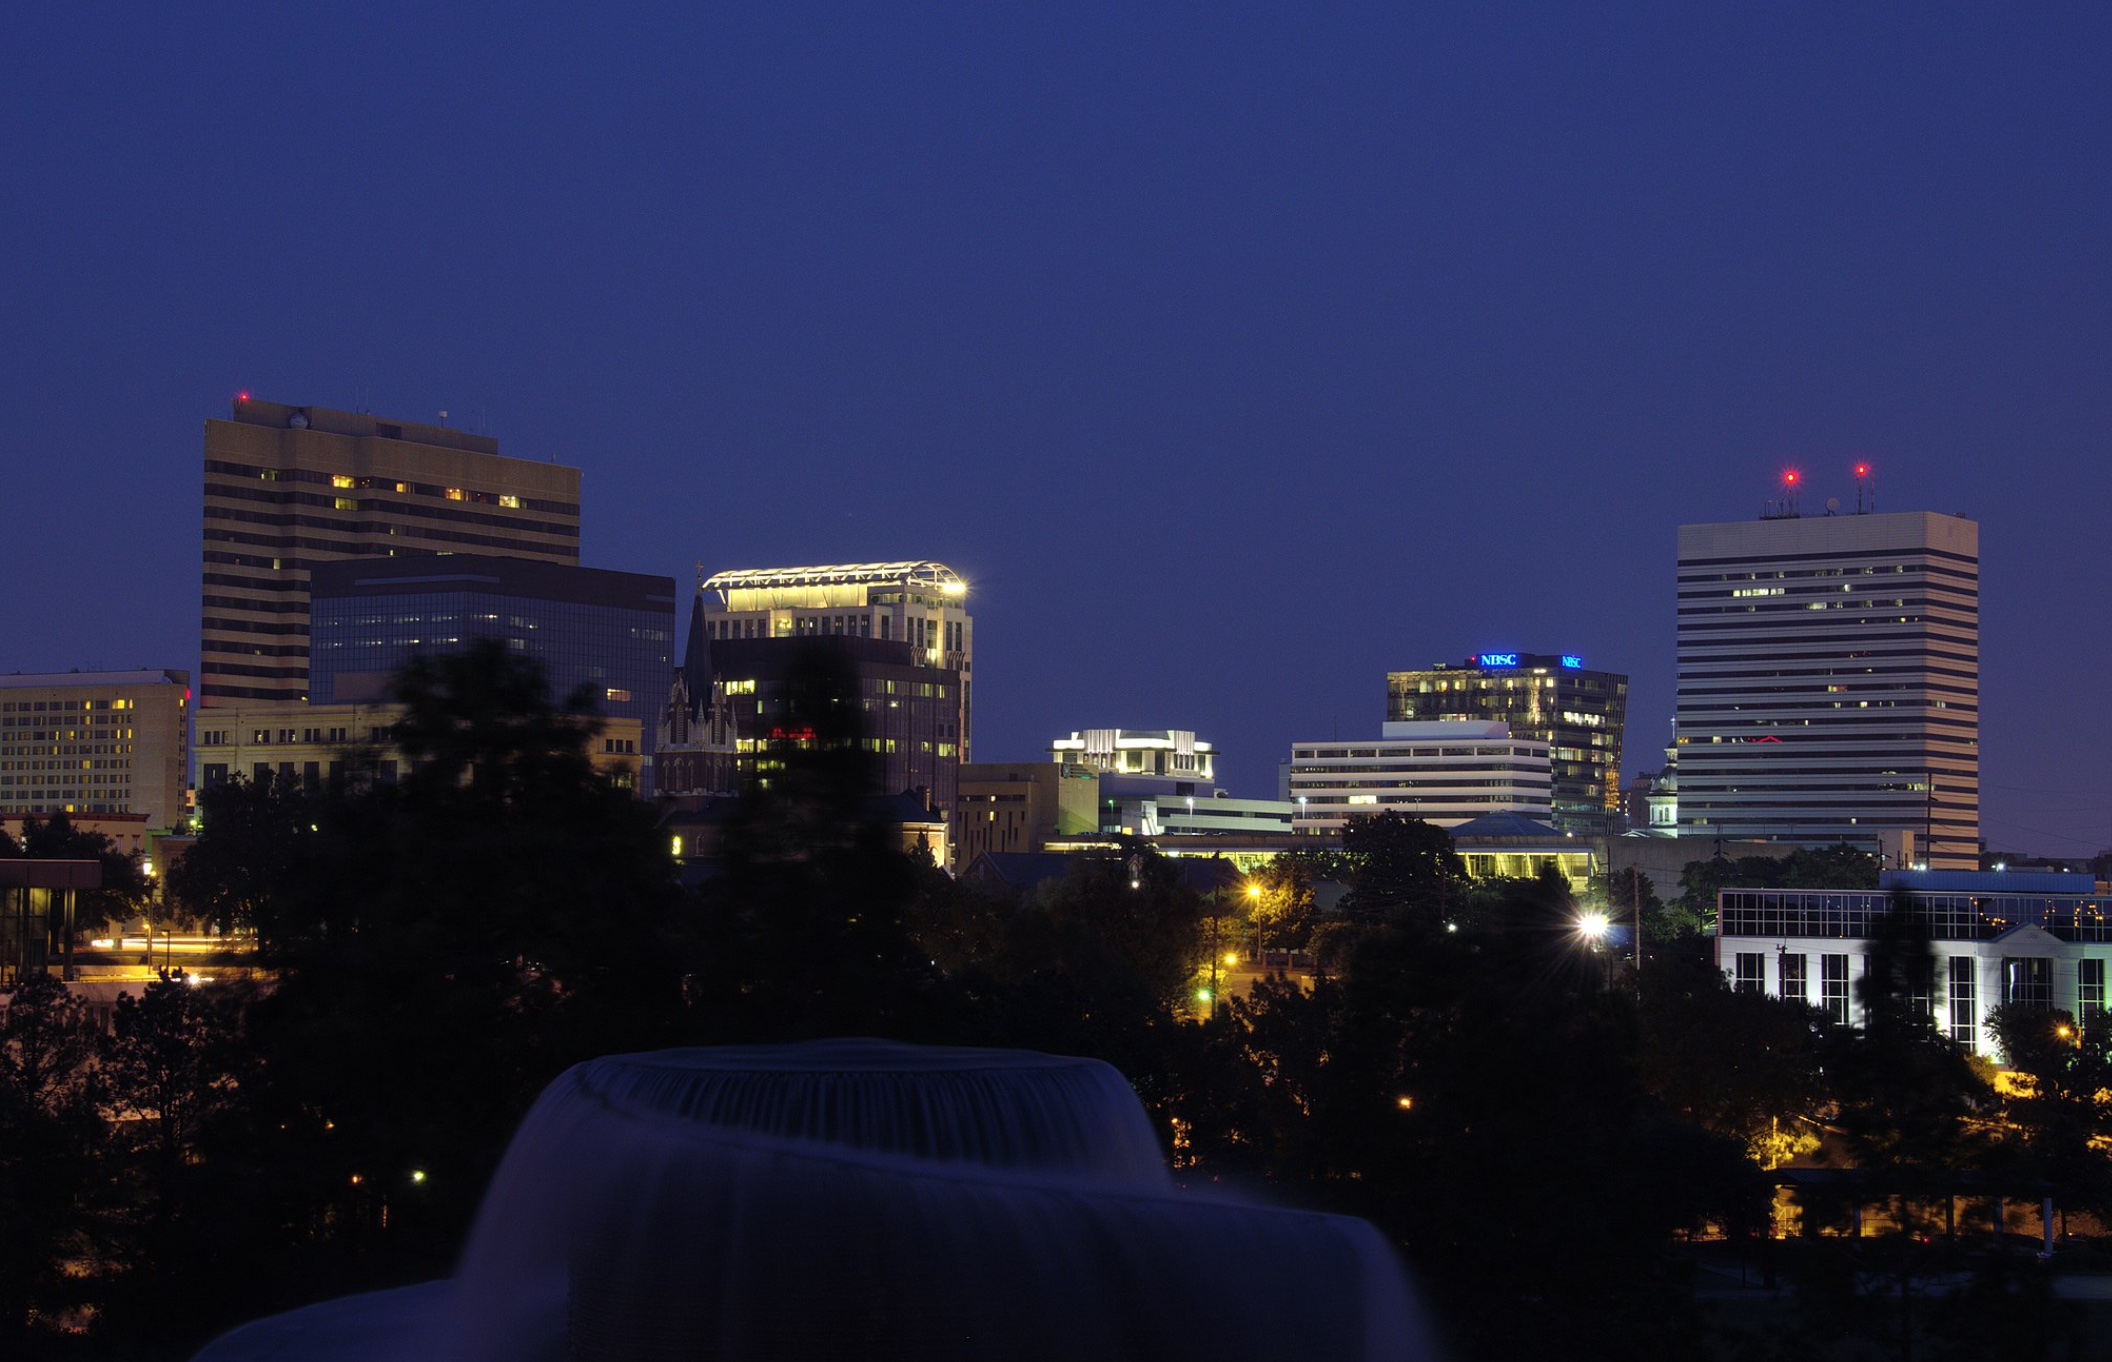 Columbia, SC skyline at night; image by Tim from Atlanta, USA, CC BY 2.0, via Wikimedia Commons.